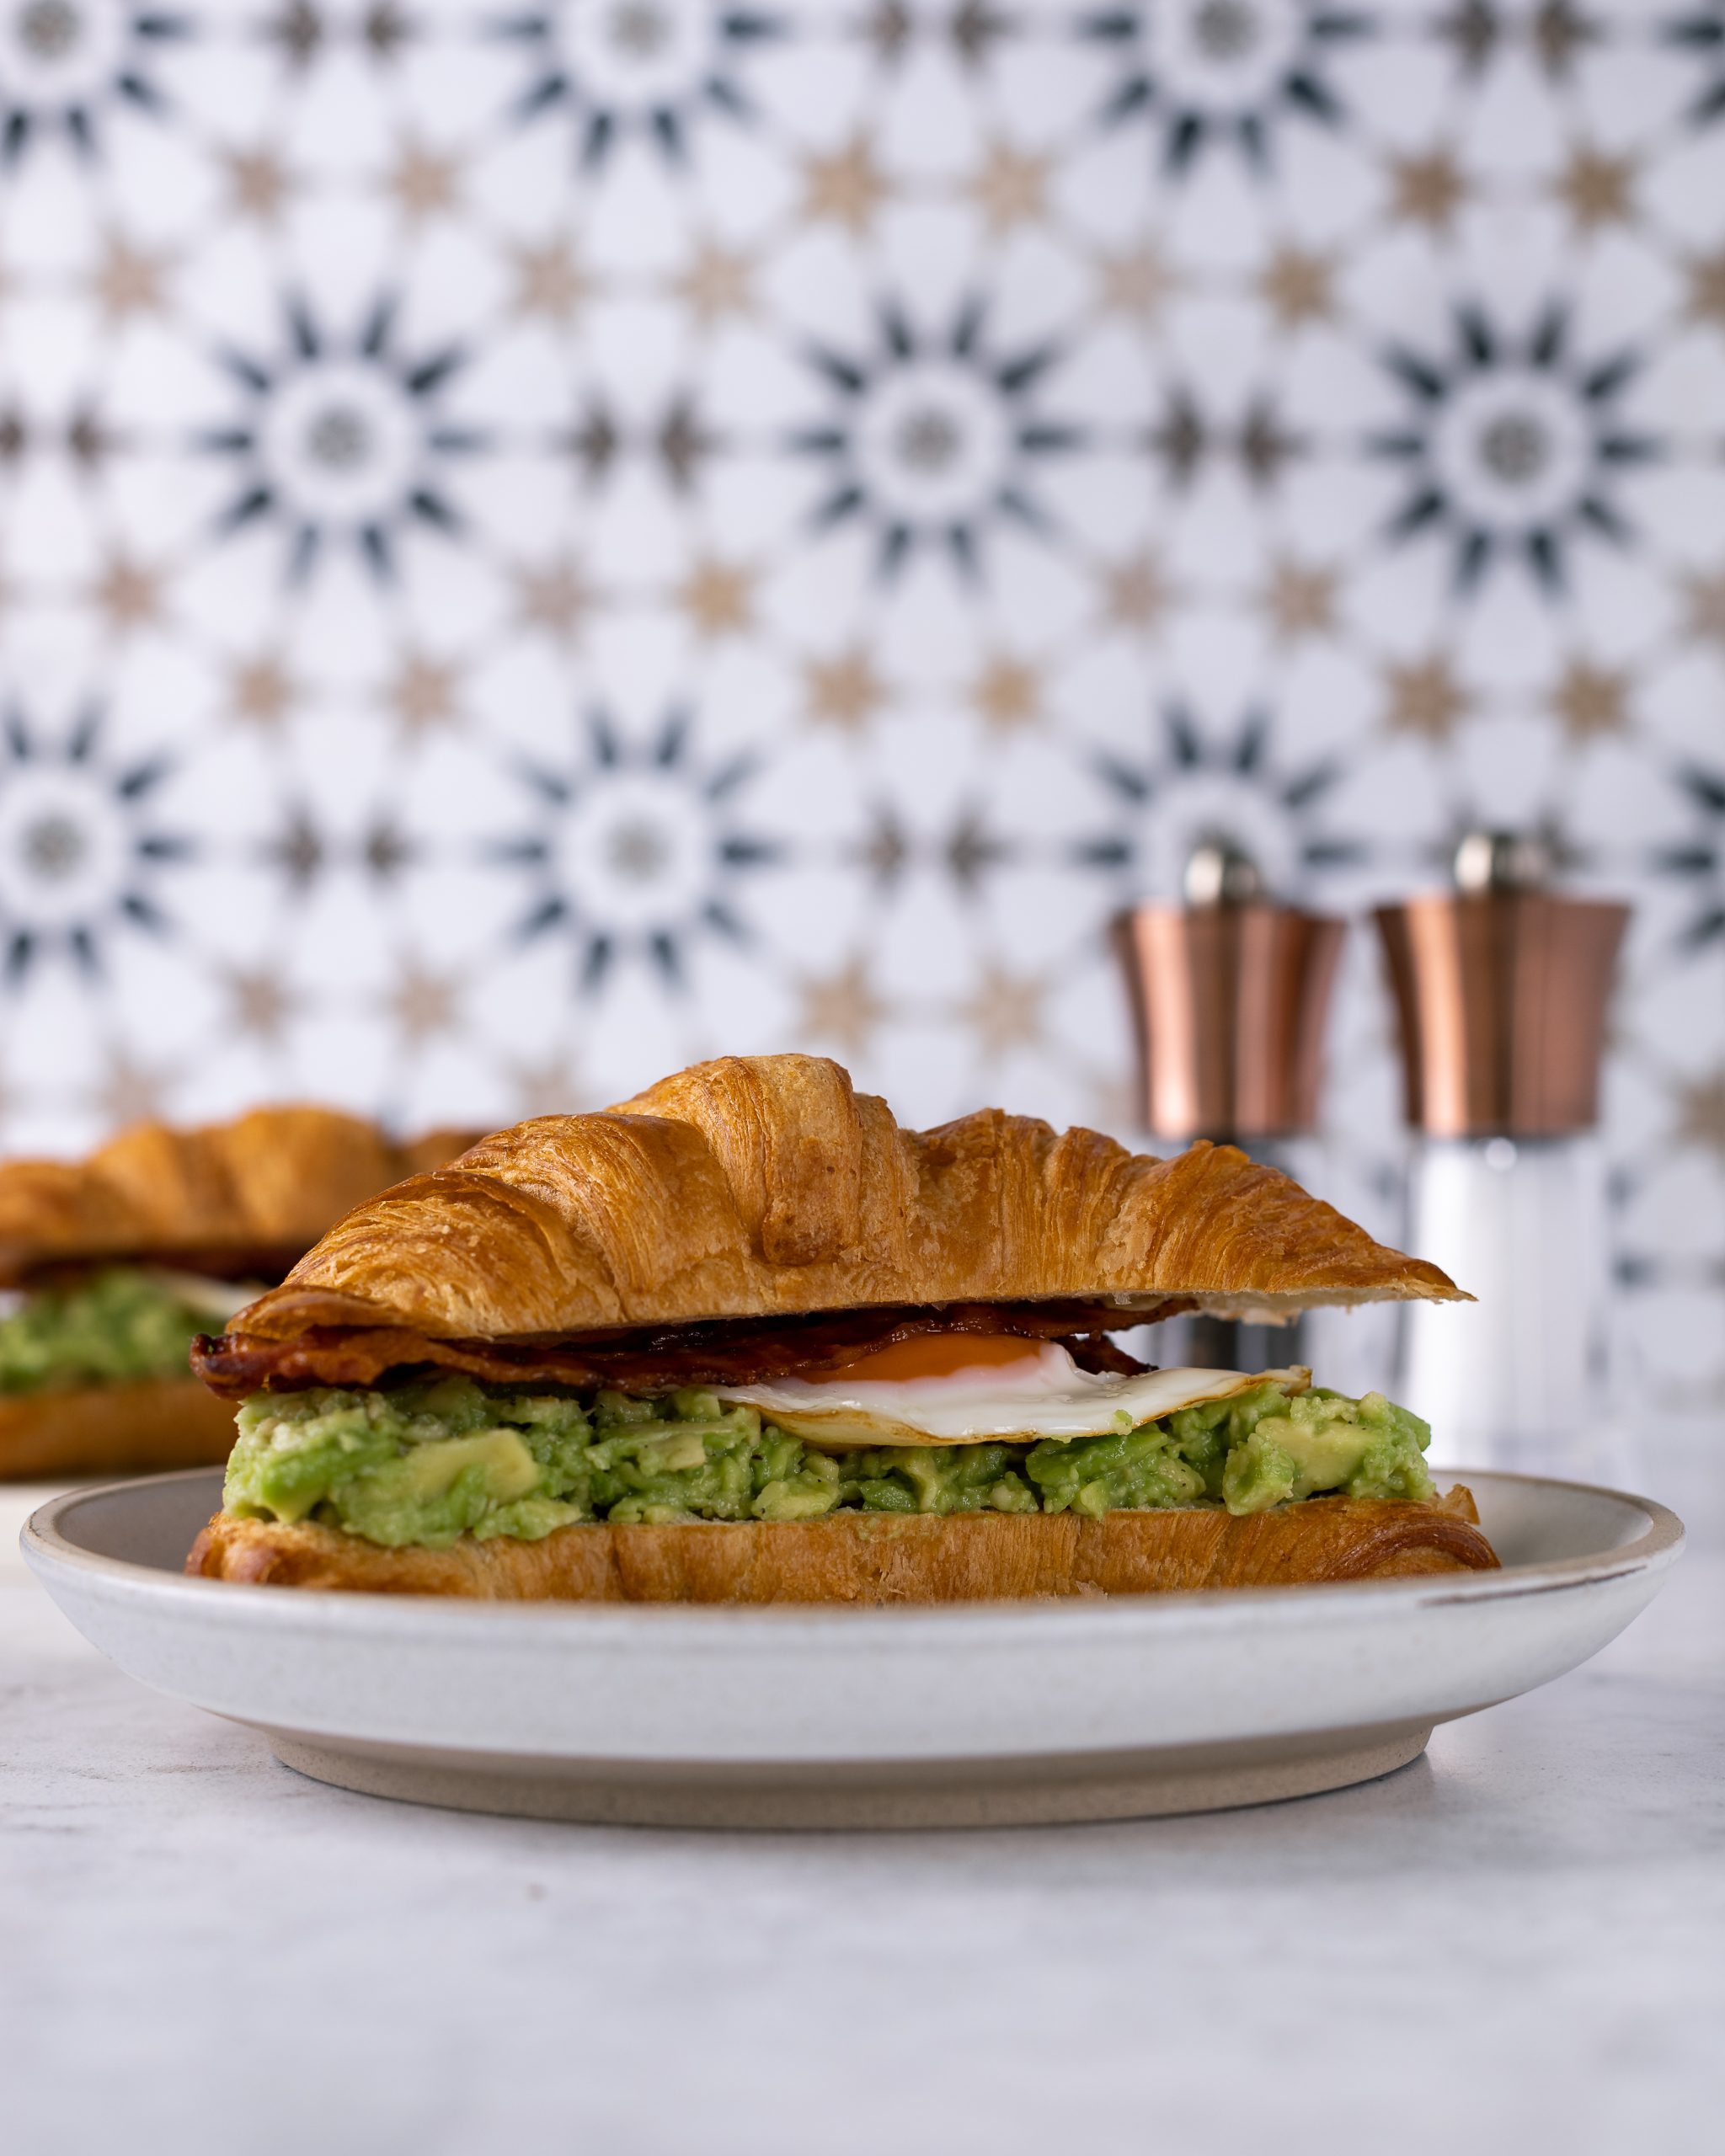 The ultimate brunch with loaded croissants. Croissant with avocado smash with a pinch of chilli flakes, rich fried egg with crispy bacon.